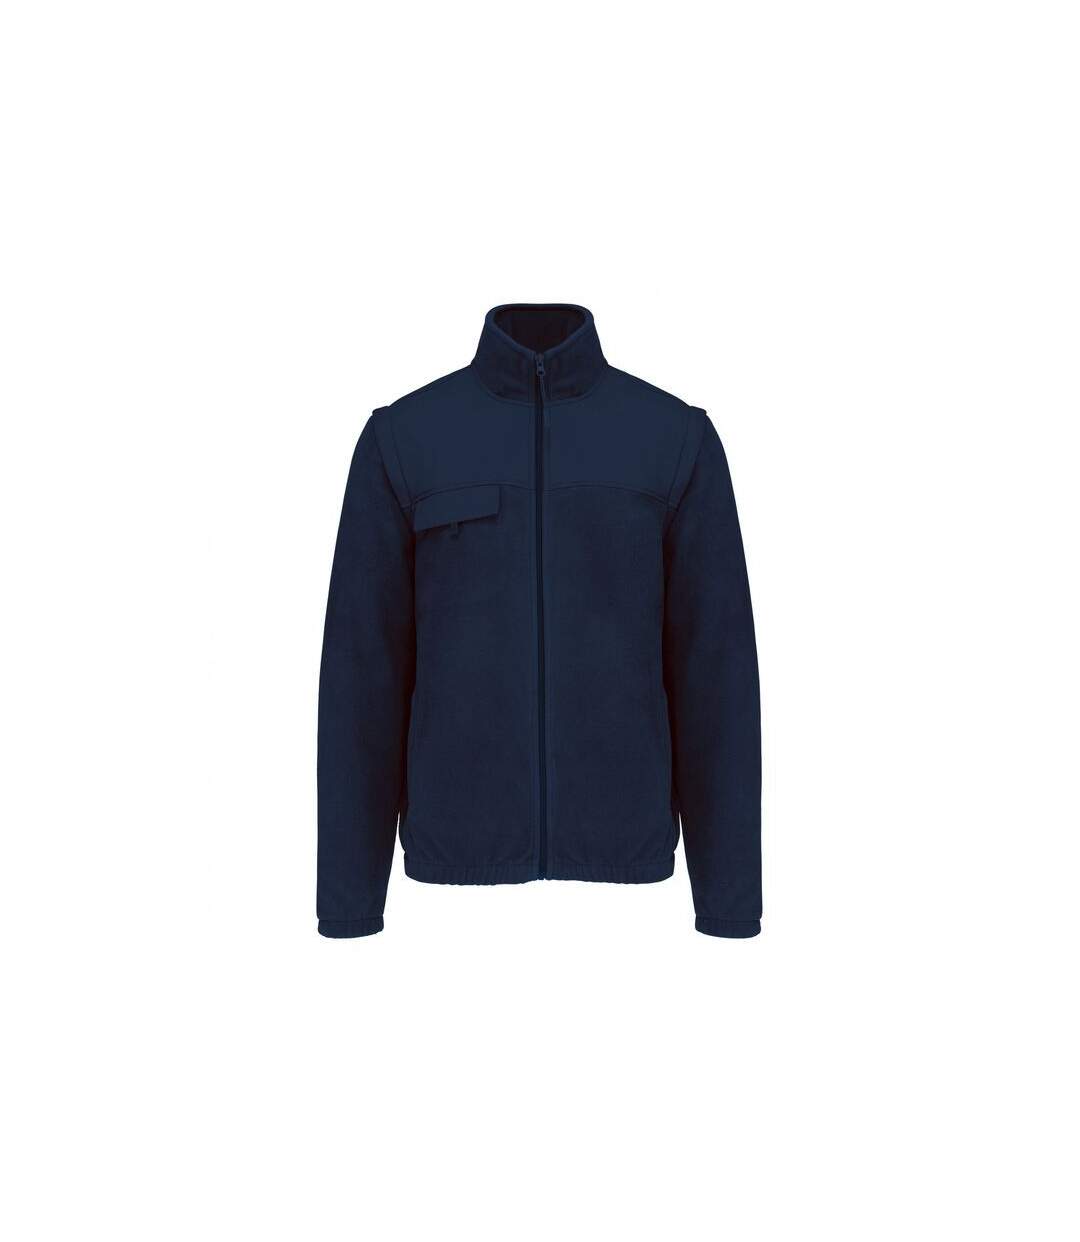 Veste polaire manches amovibles WK. Designed To Work